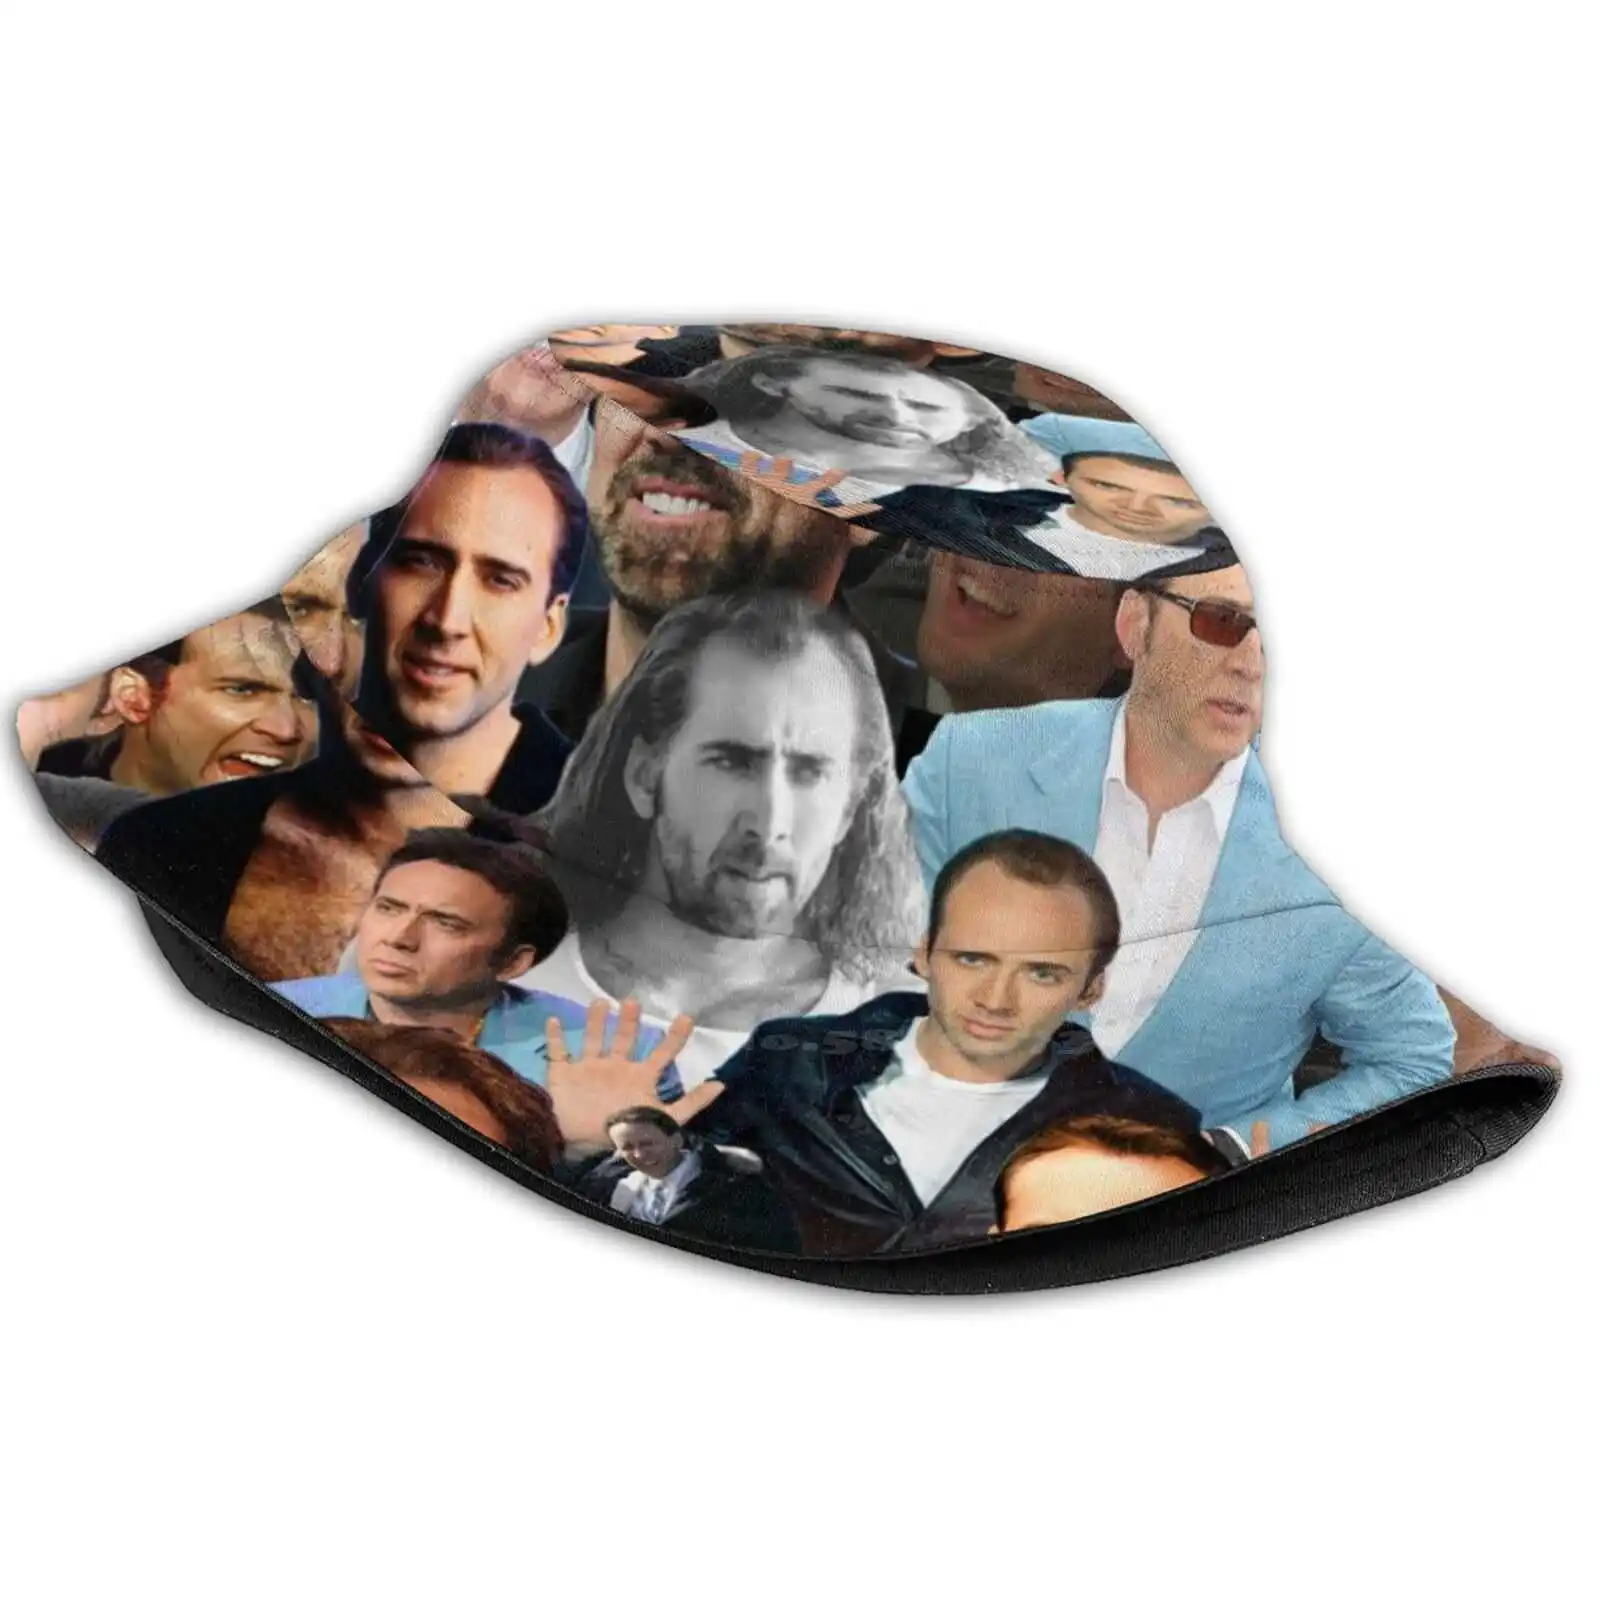 

Nicolas Cage Overload Fishing Hunting Climbing Cap Fisherman Hats Nicolas Cage Nicholas Cage Nicolas Cage One True God Allover